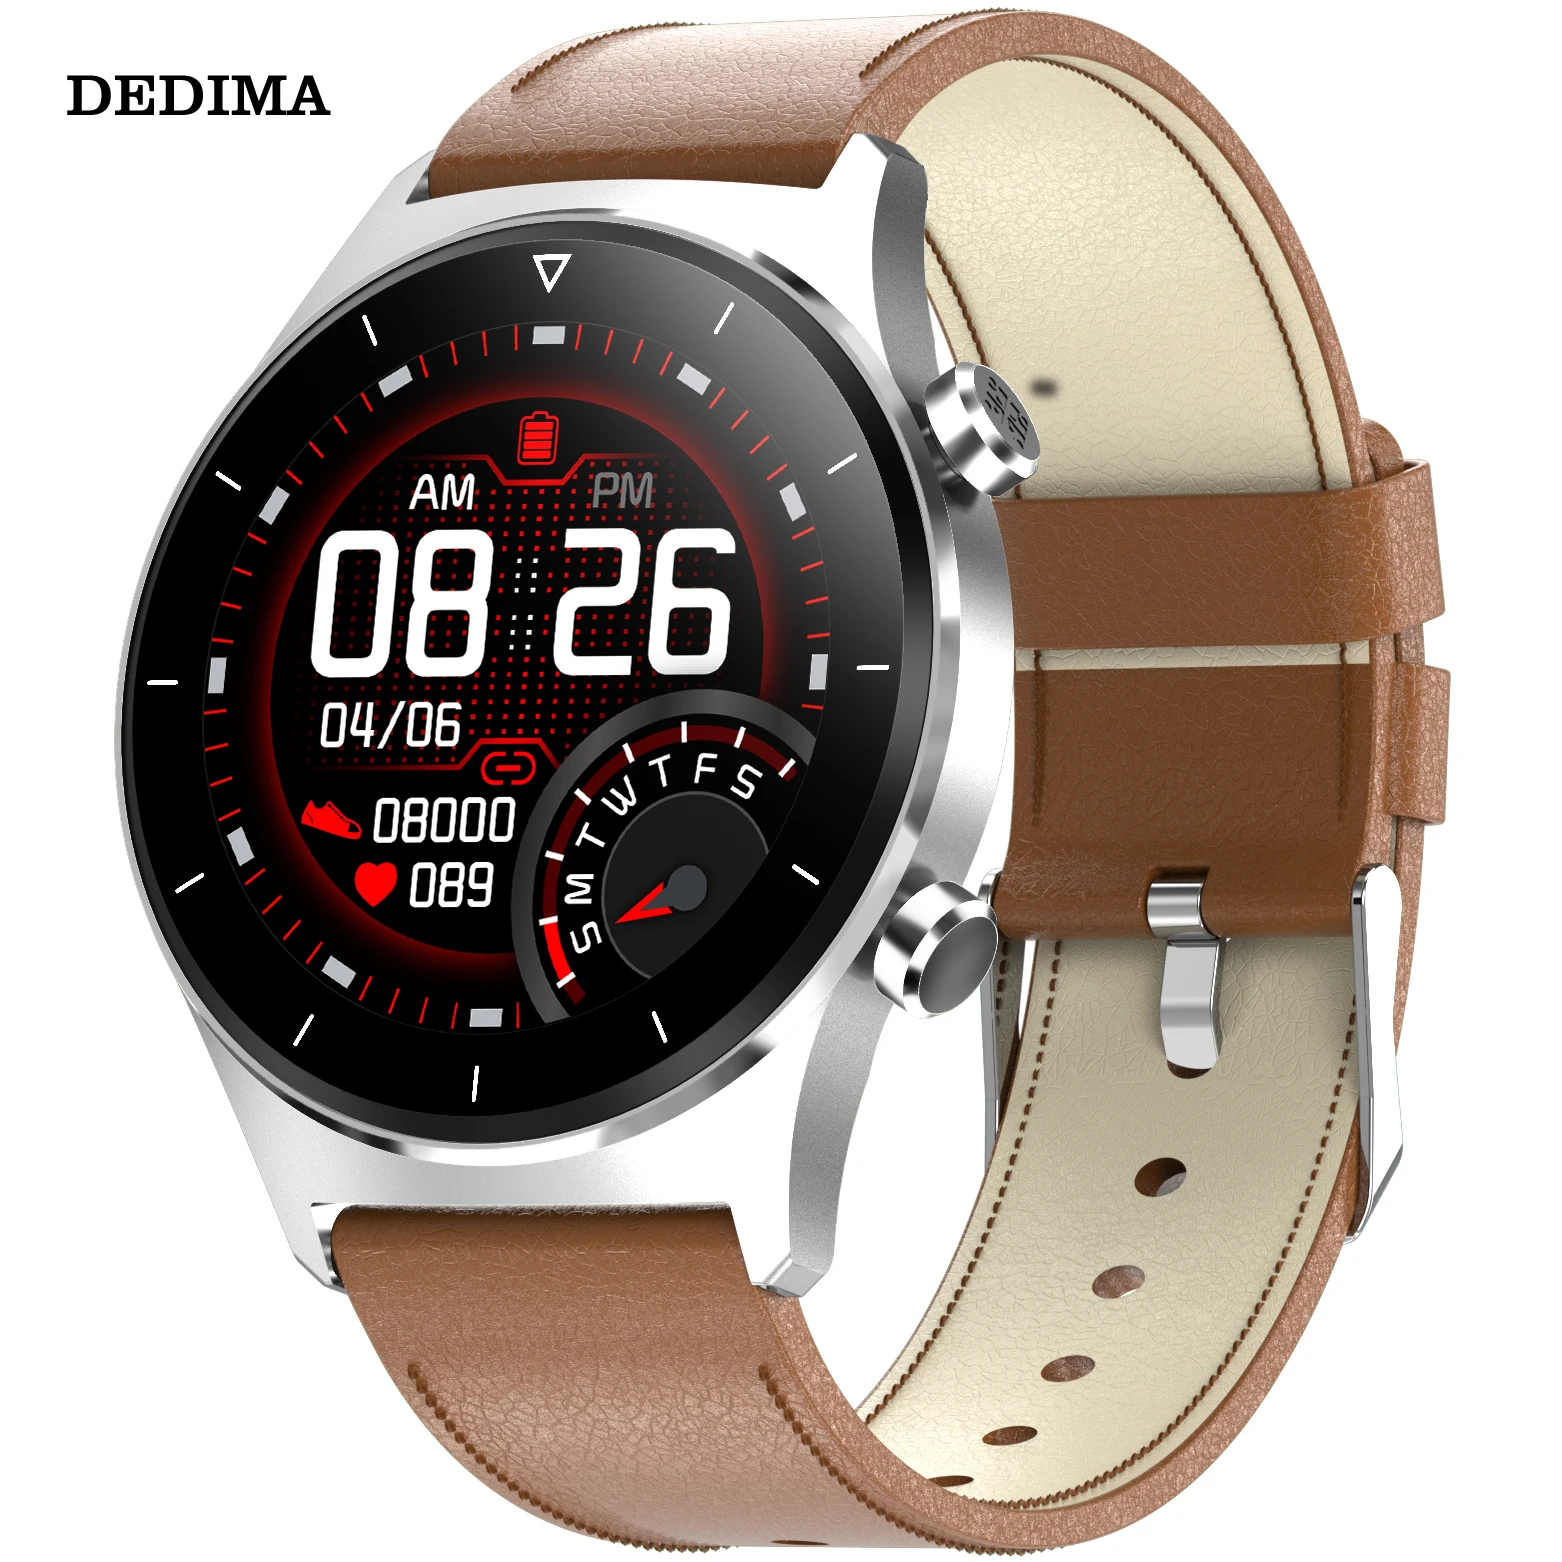 2021 simple and stylish men's smart watch heart rate meter pedometer blood pressure sleep monitoring Android iOS health bracelet